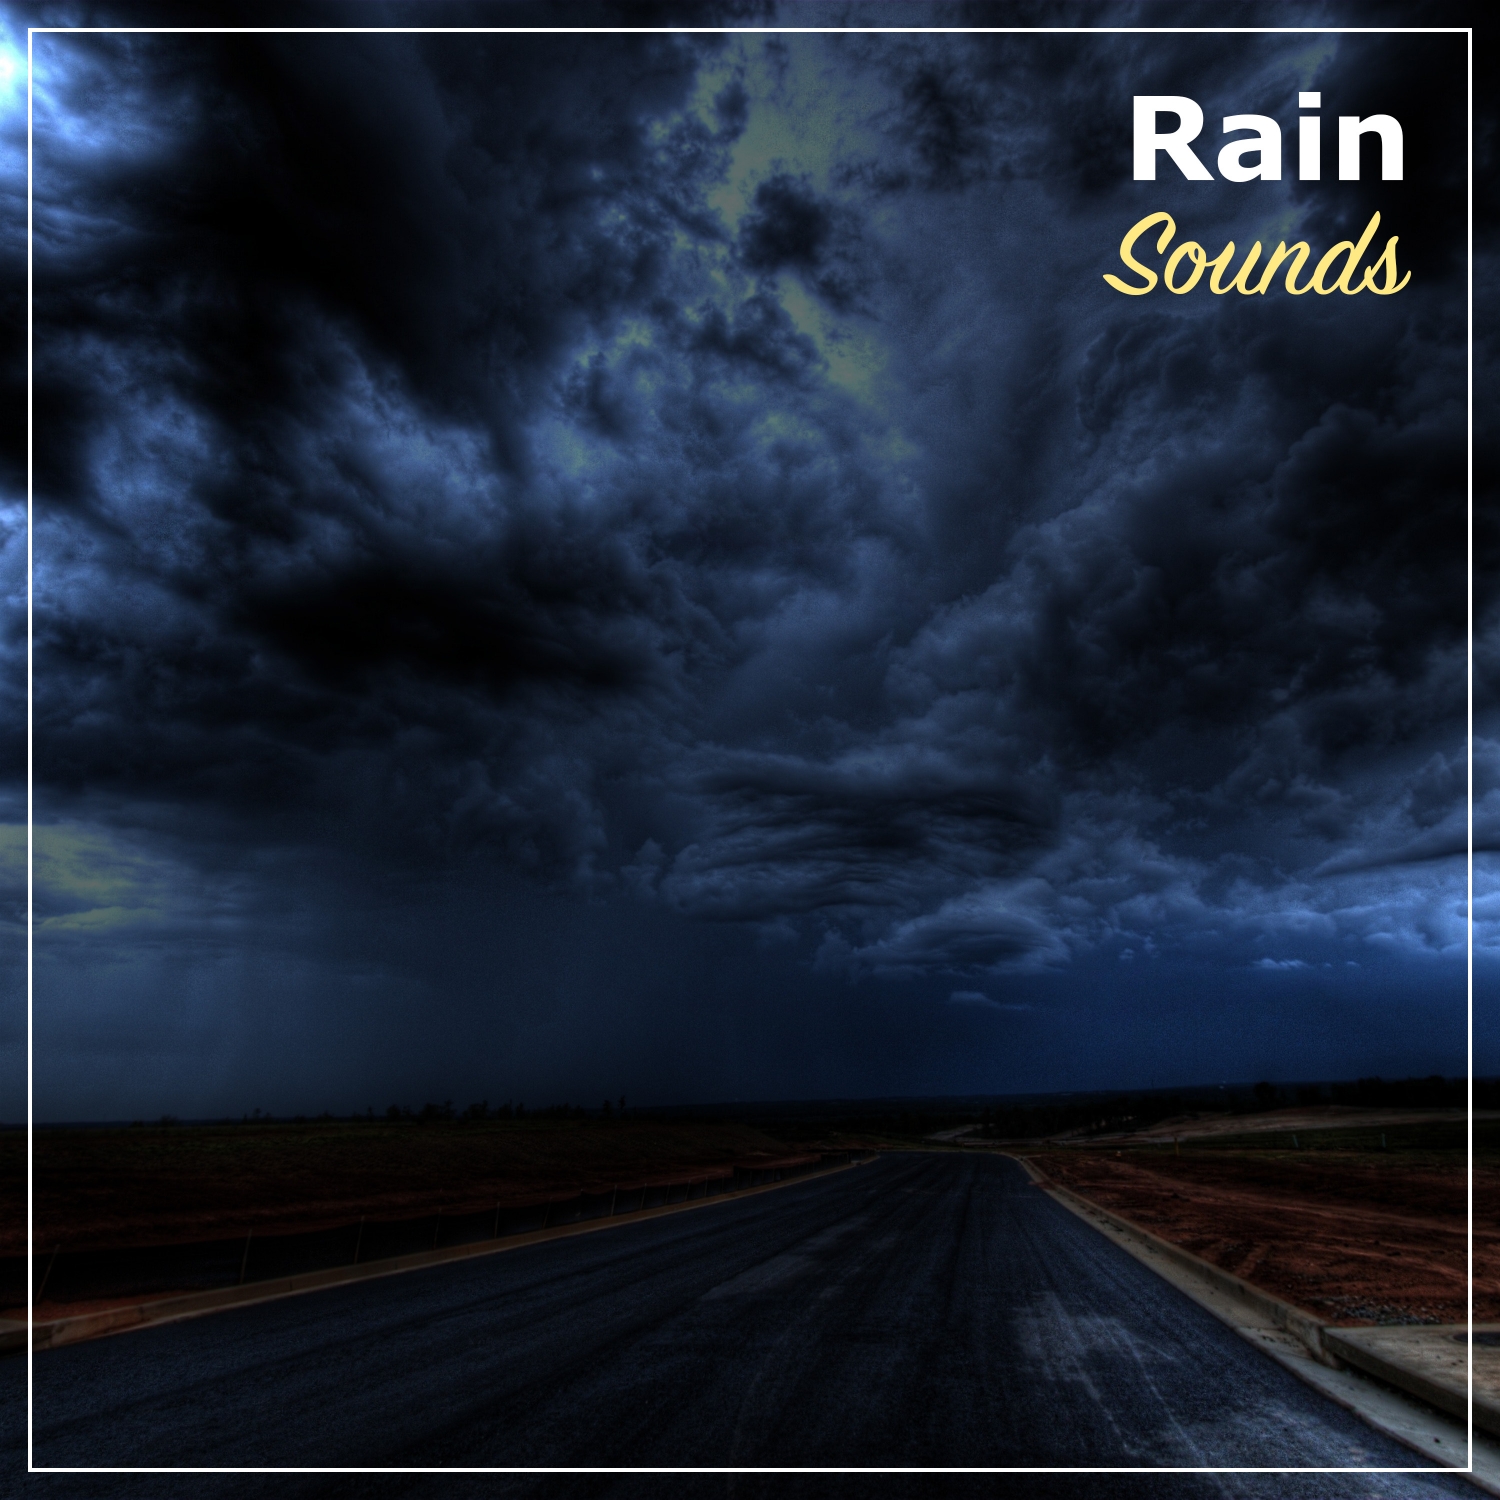 18 Calming & Tranquil Rain Sounds for Meditation and Spa, Concentration and Relaxation Nature Sounds Loopable